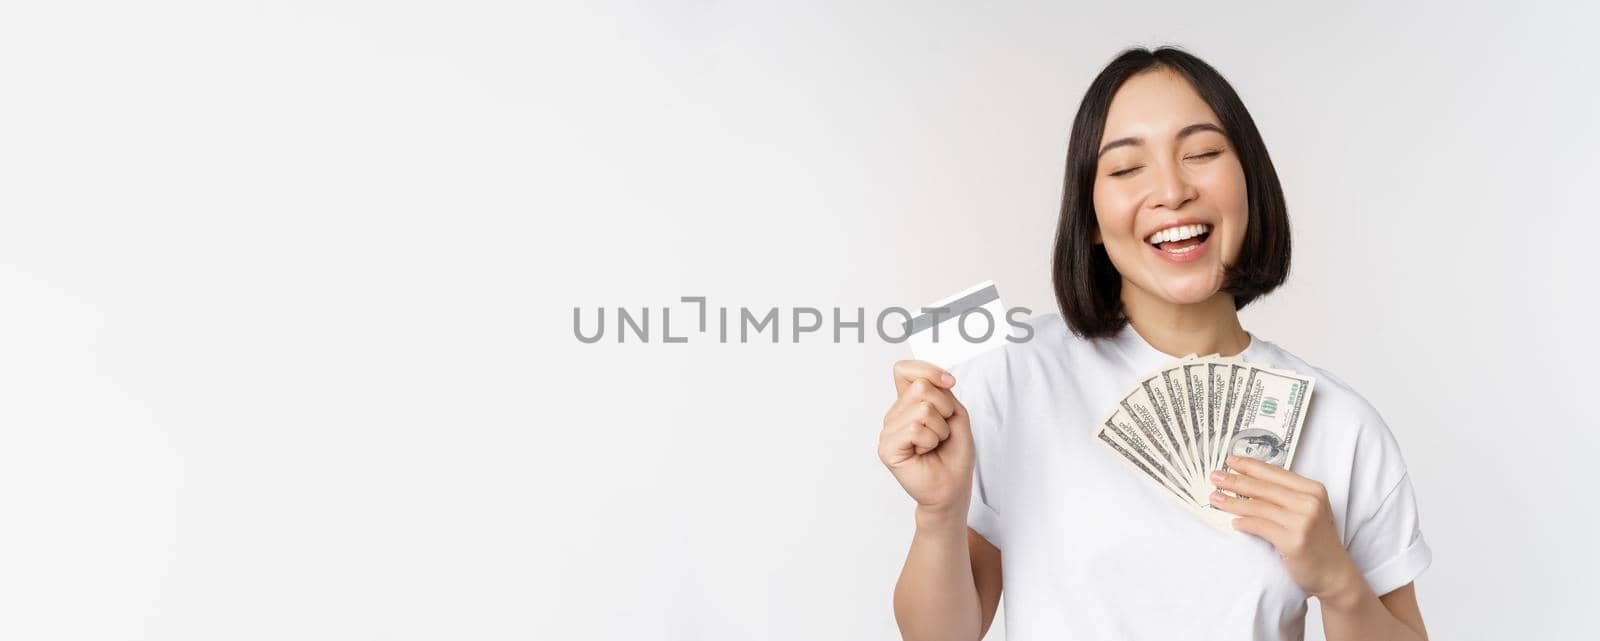 Portrait of asian woman smiling, holding credit card and money cash, dollars, standing in tshirt over white background.